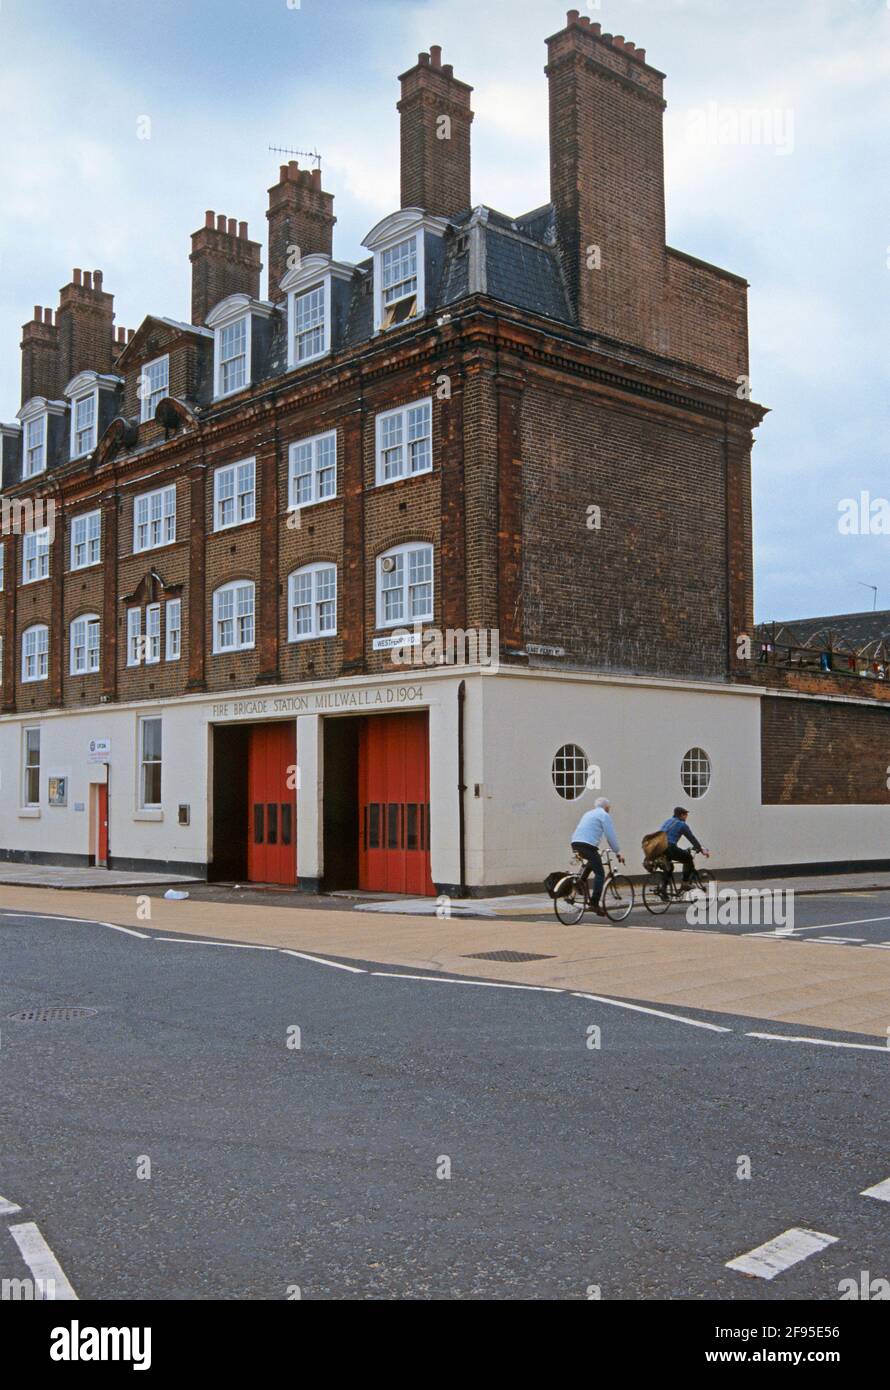 Millwall Fire Station, à l'angle de Westferry Road et East Ferry Road, Isle of Dogs, Londres Banque D'Images